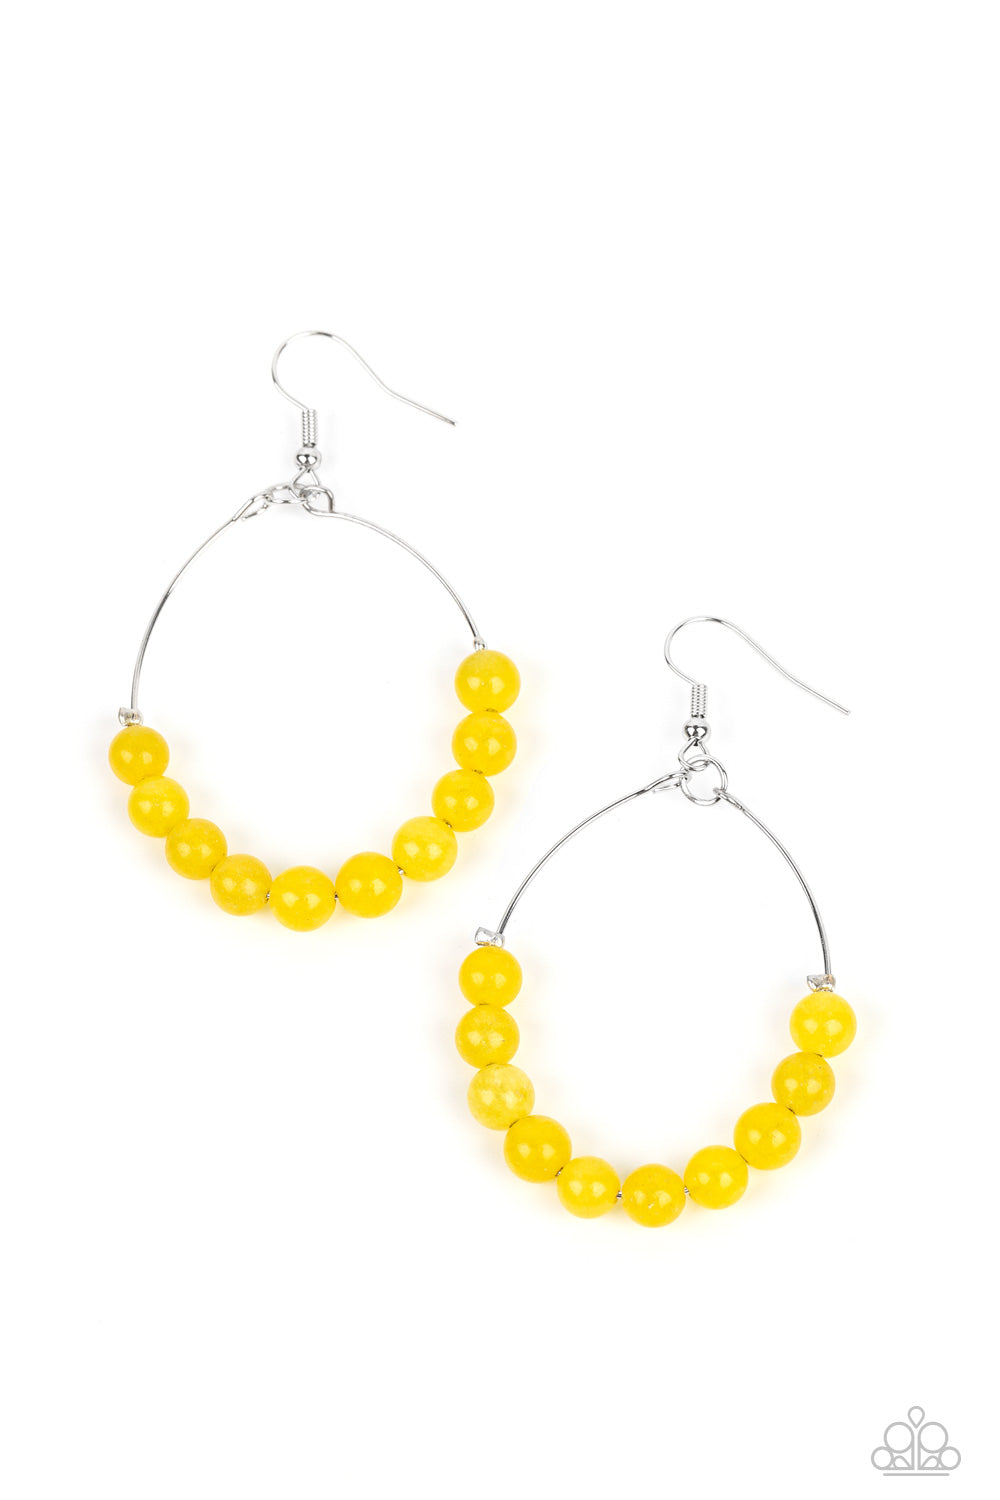 Catch a Breeze Yellow Earring - Paparazzi Accessories  Yellow stones are threaded along dangling silver hoops, evoking a trendy laidback design. Earring attaches to a standard fishhook fitting.  Featured inside The Preview at GLOW!  Sold as one pair of earrings.